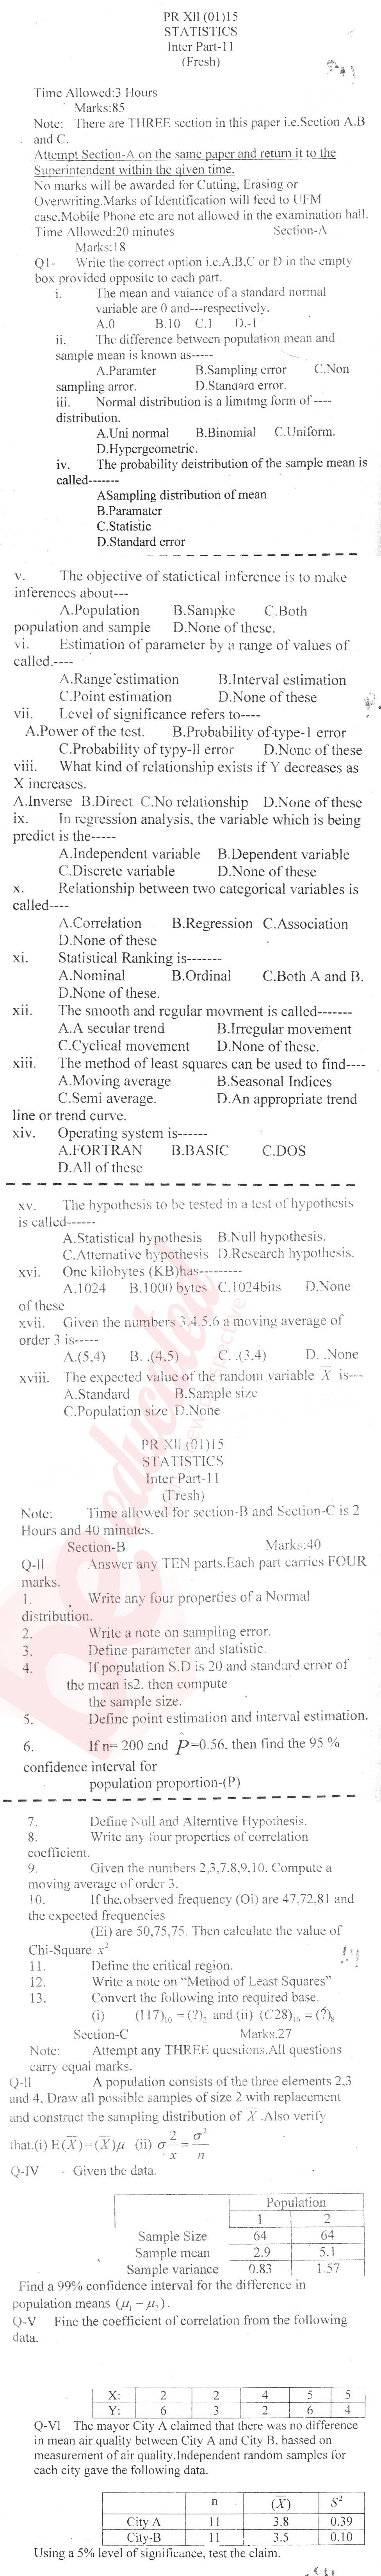 Statistics 12th class Past Paper Group 1 BISE Swat 2015